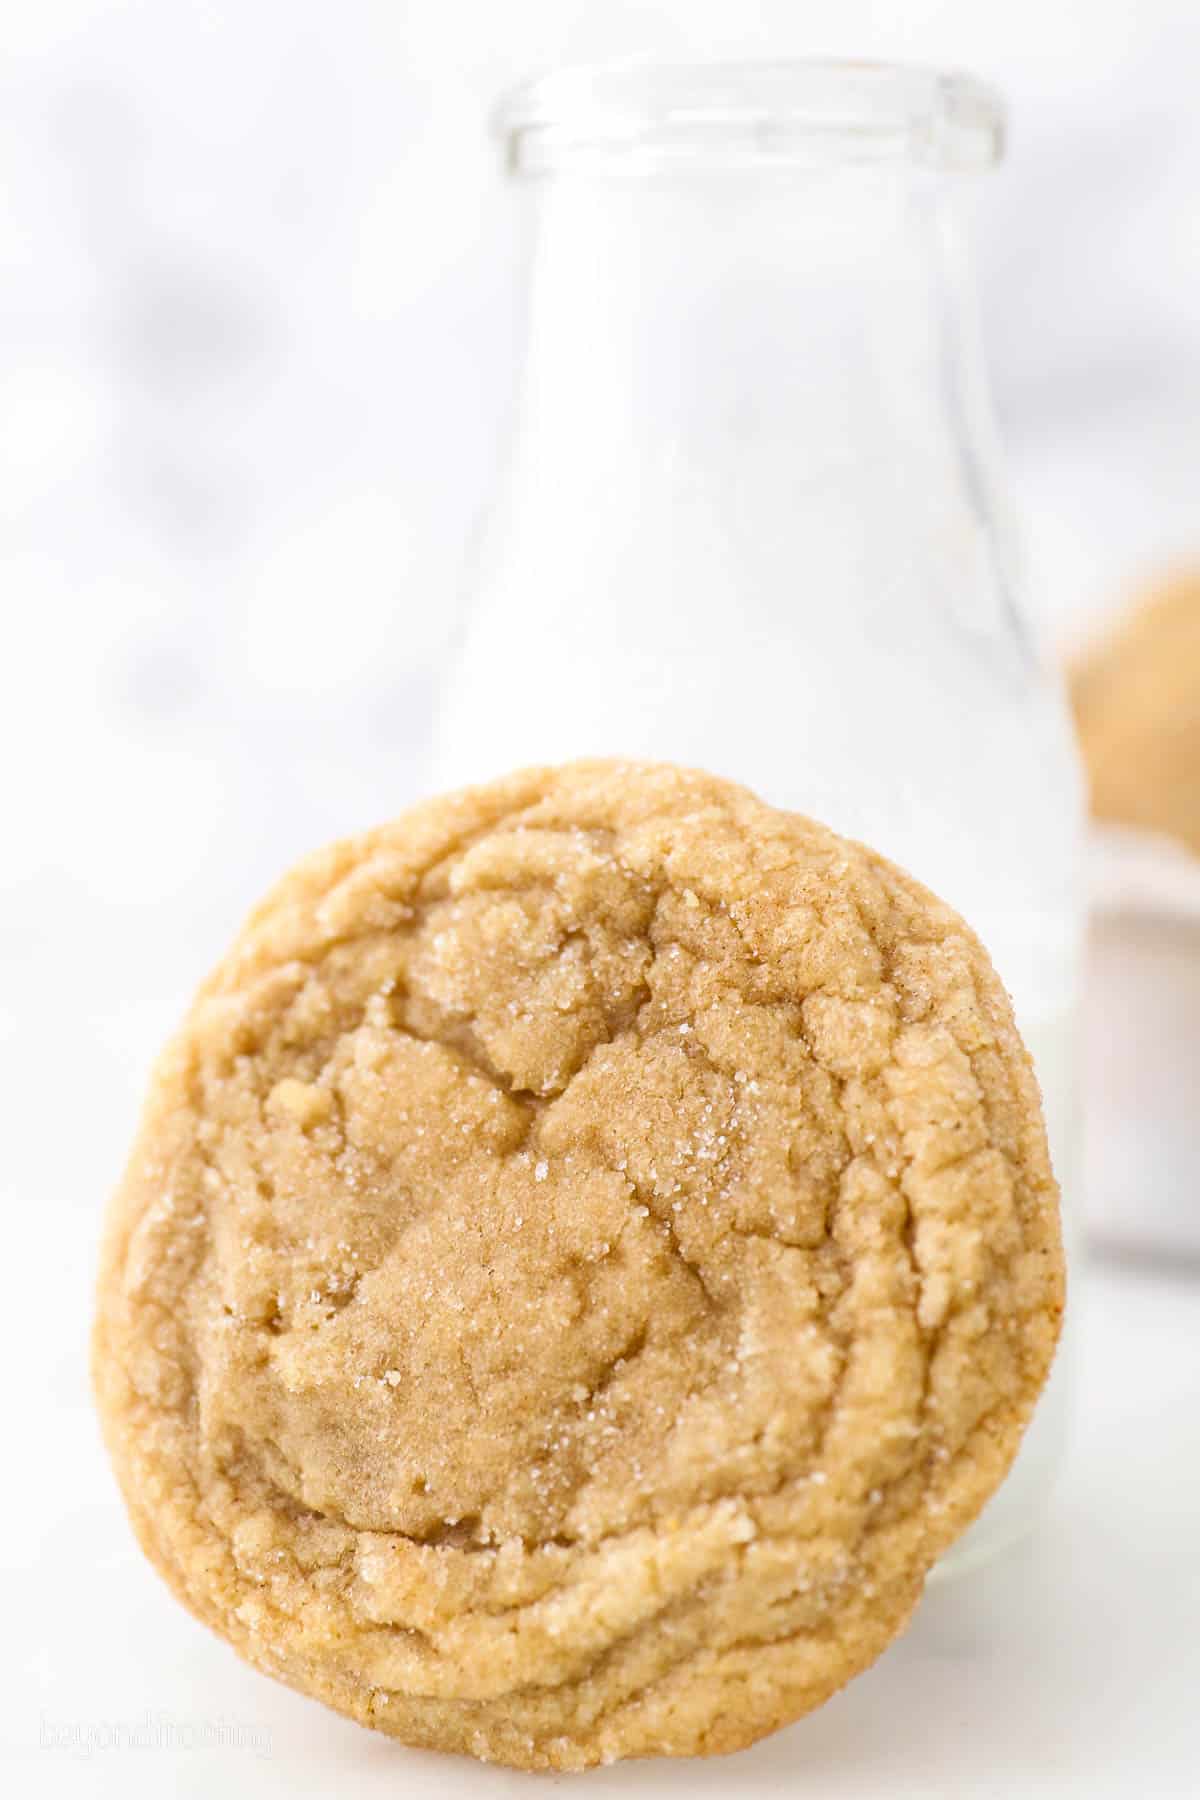 A brown sugar cookie leaning against a glass of milk.